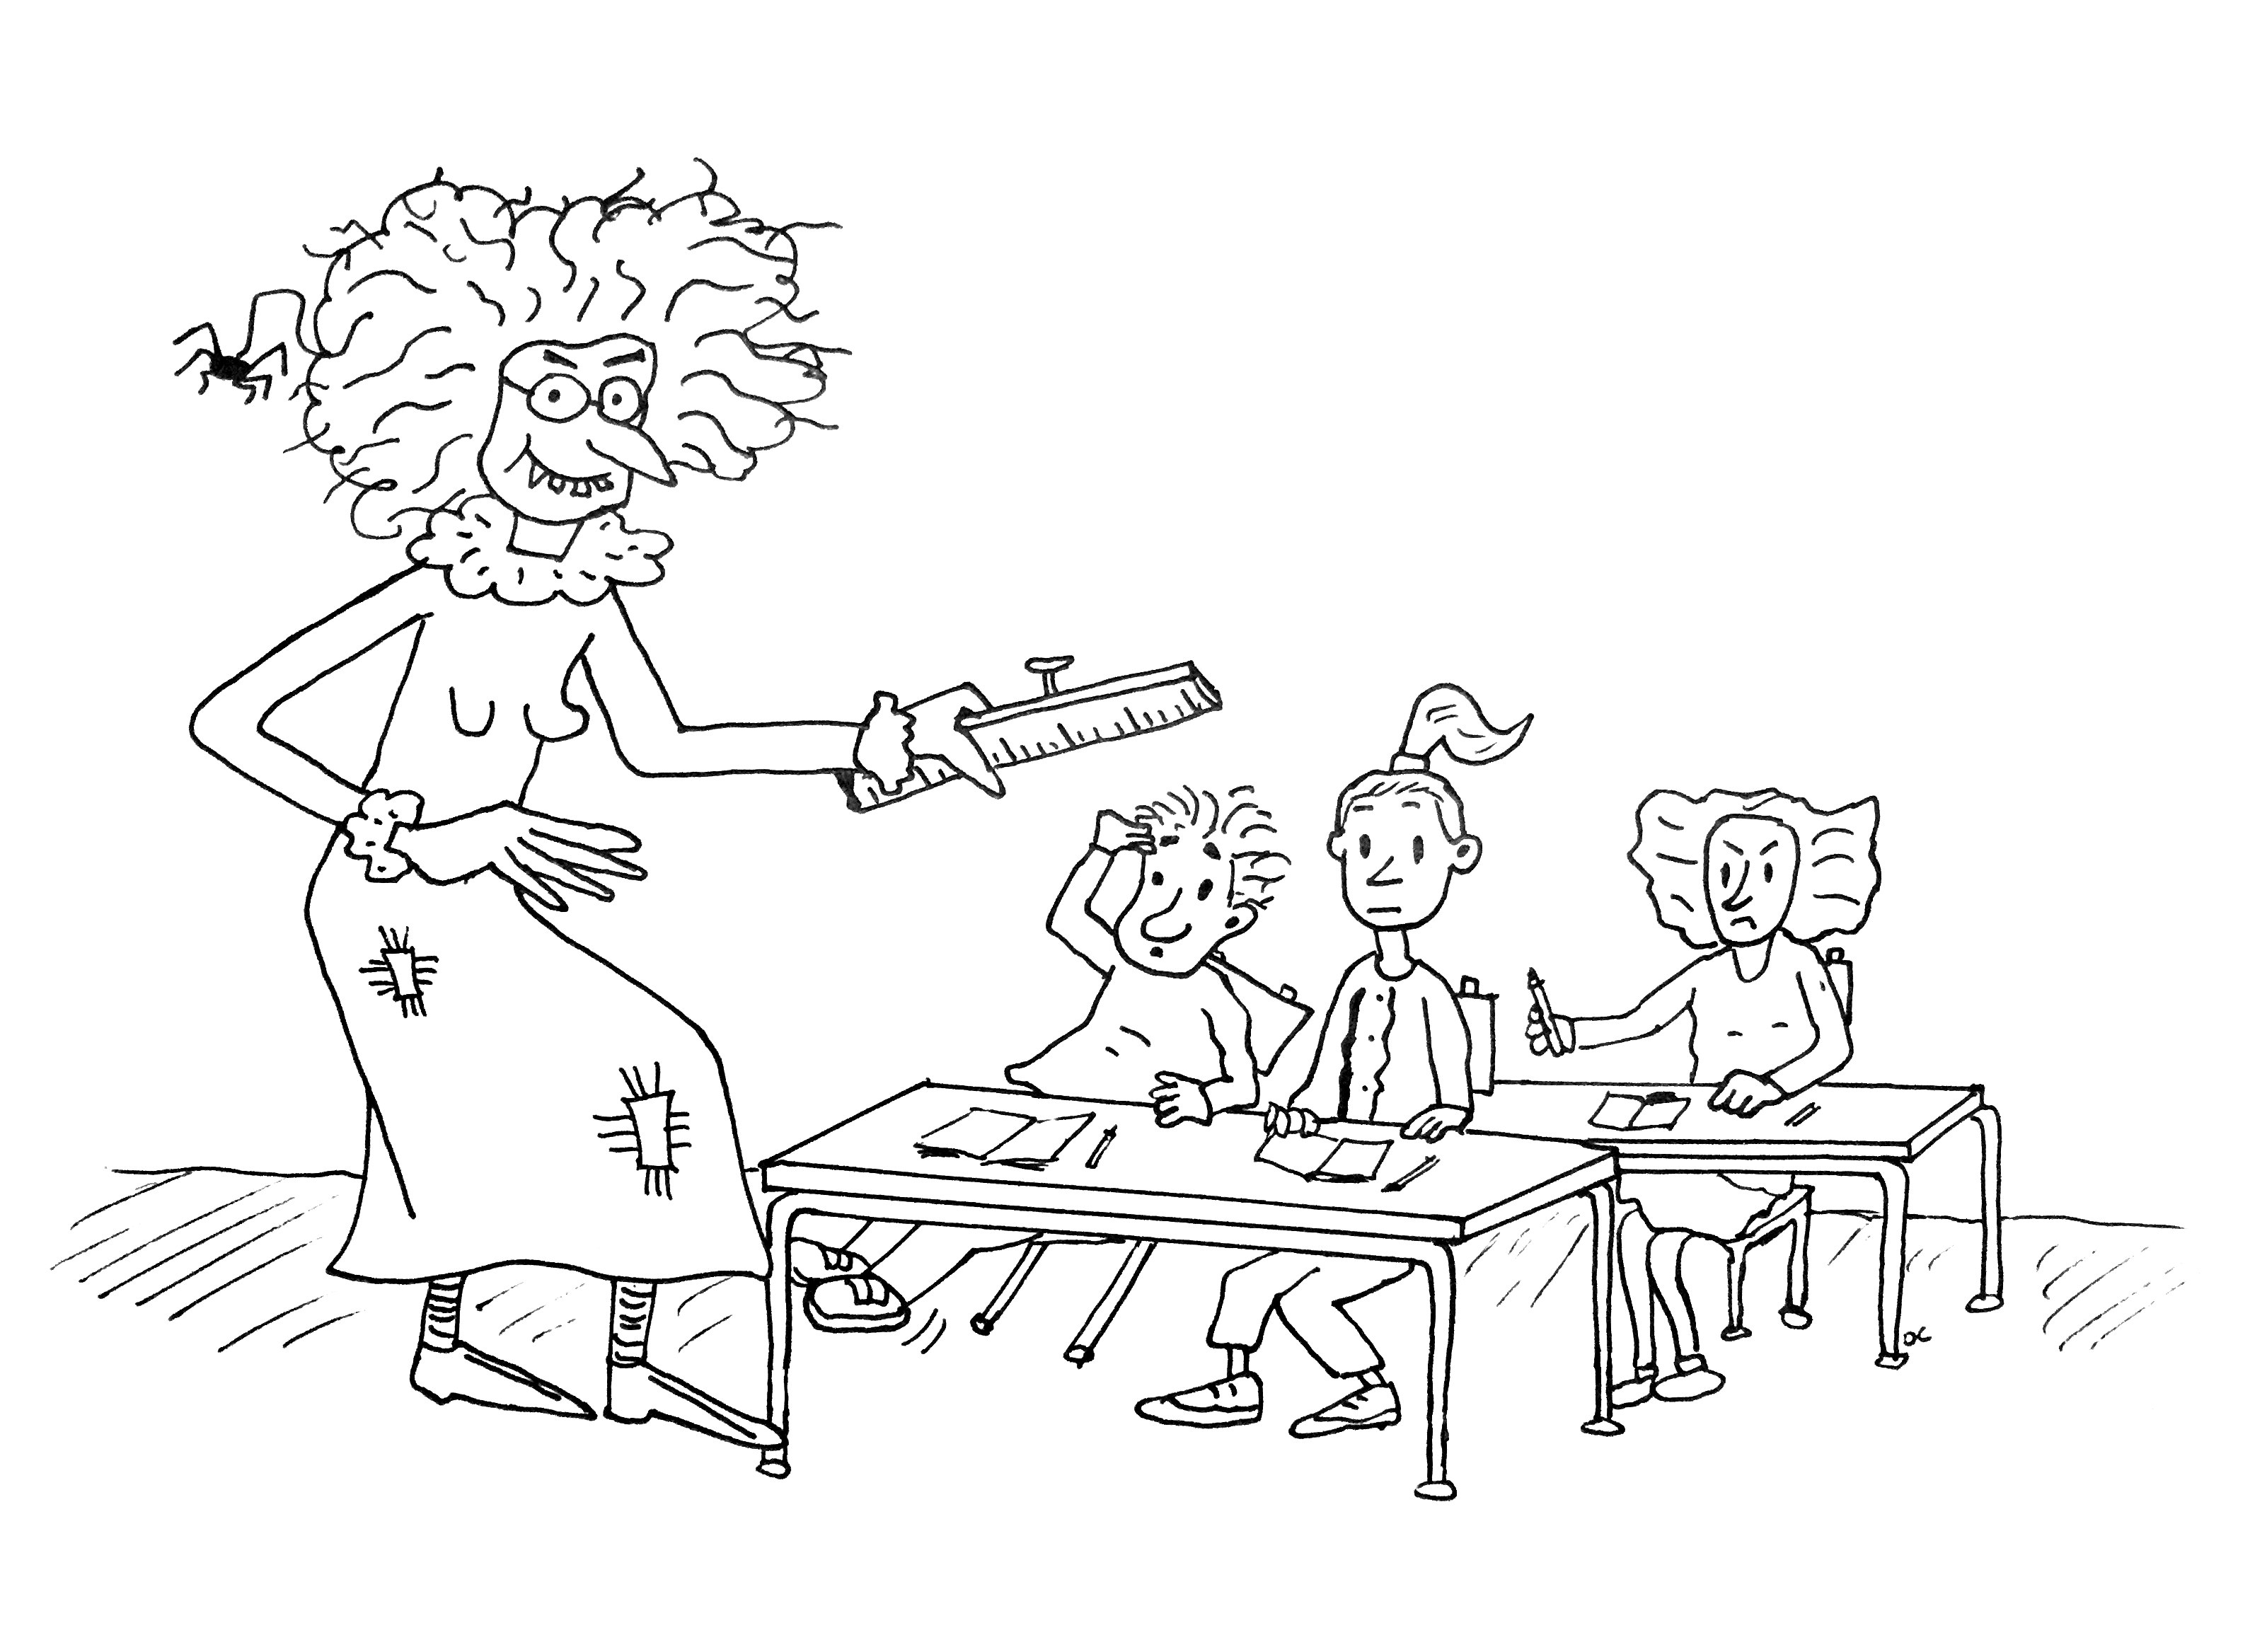 Coloring Pages Teacher The Teacher Is A Witch School Coloring Pages For Kids To Print Color